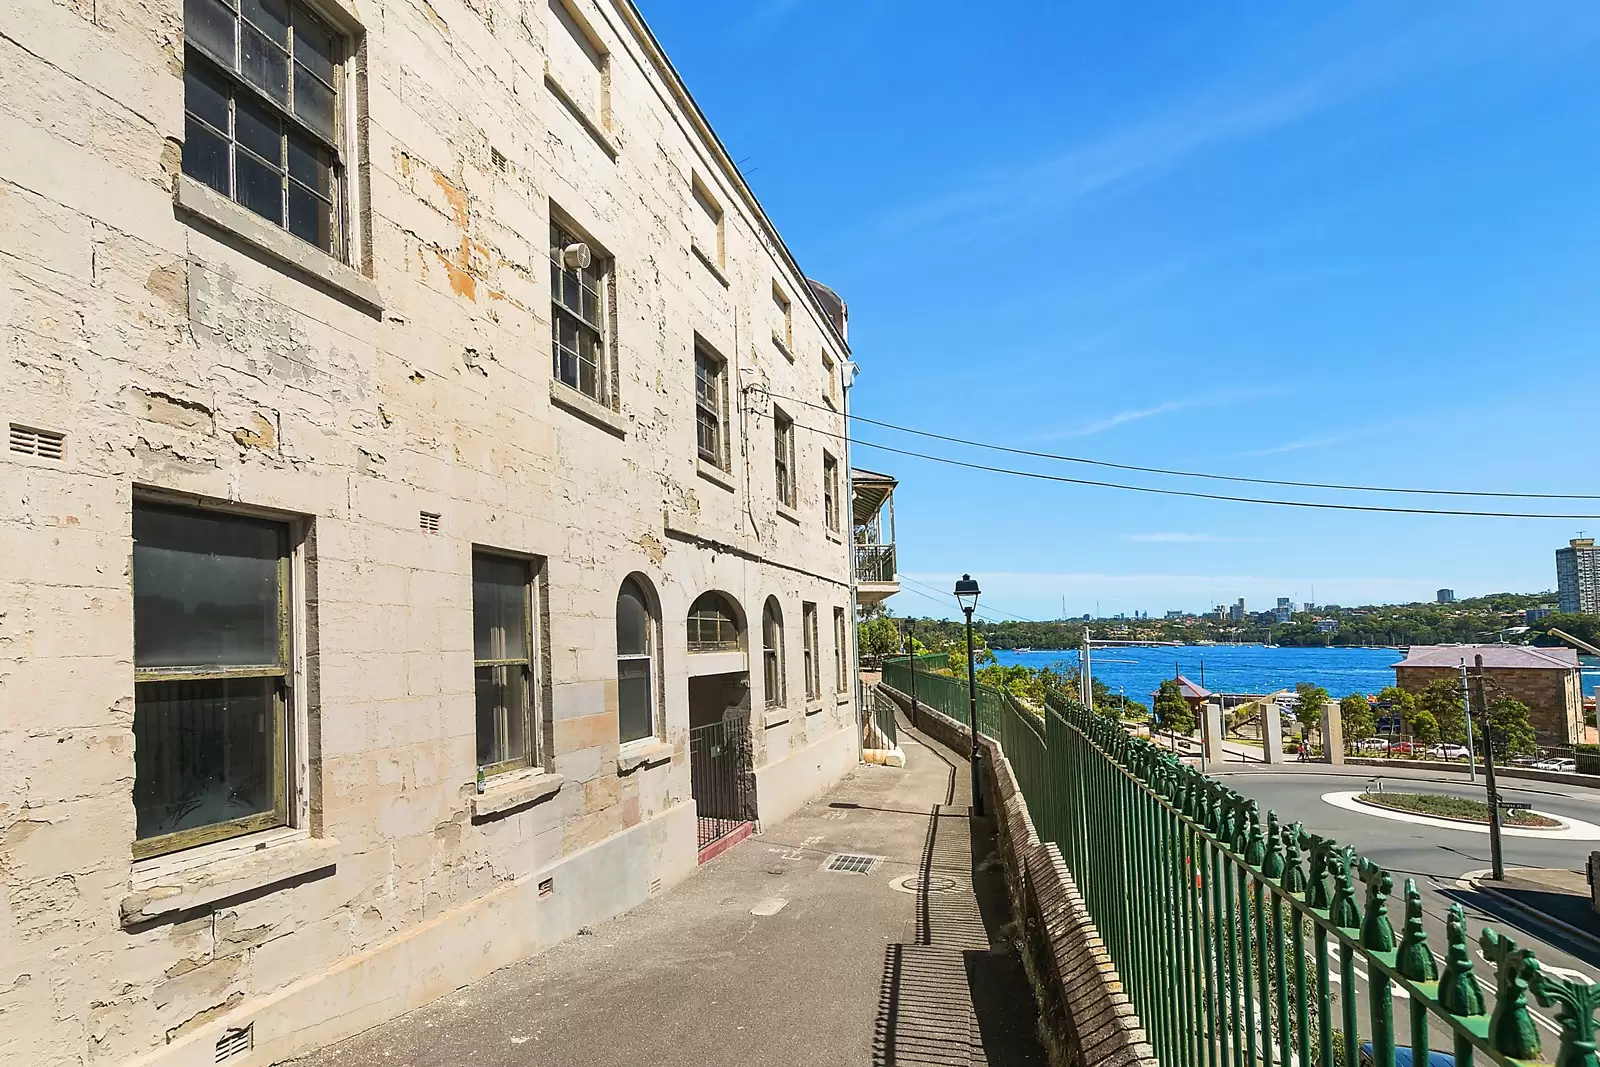 Photo #4: 11-13A Dalgety Road, Millers Point - Sold by Sydney Sotheby's International Realty